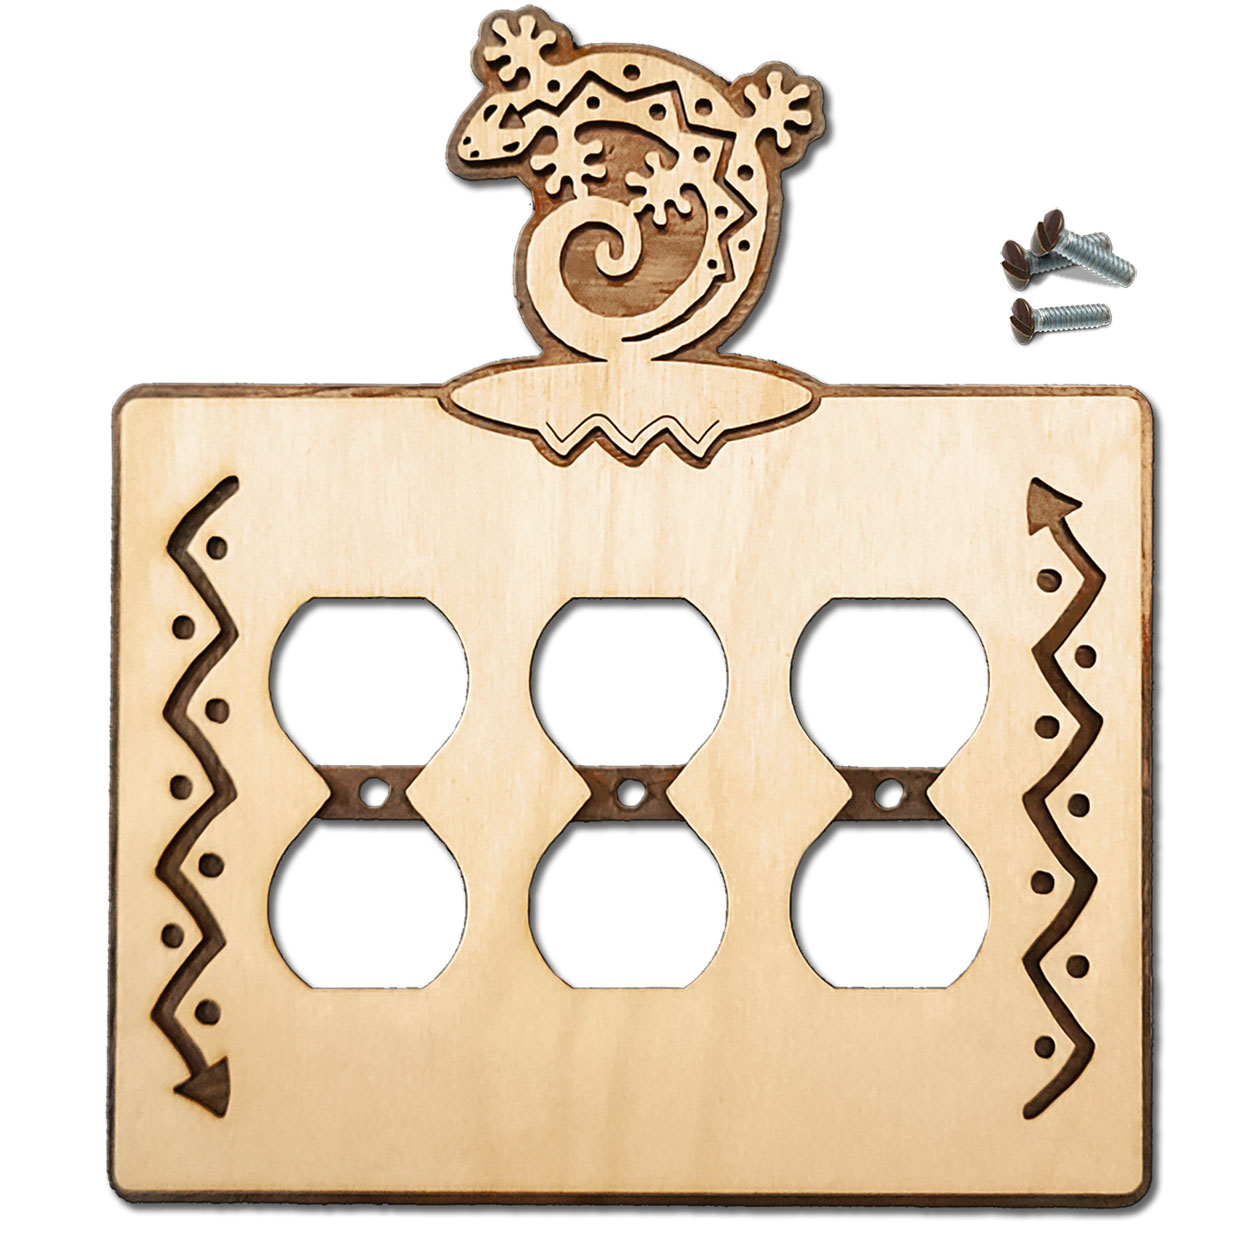 167916 -  Curled Gecko Southwestern Decor Triple Outlet Cover in Natural Birch